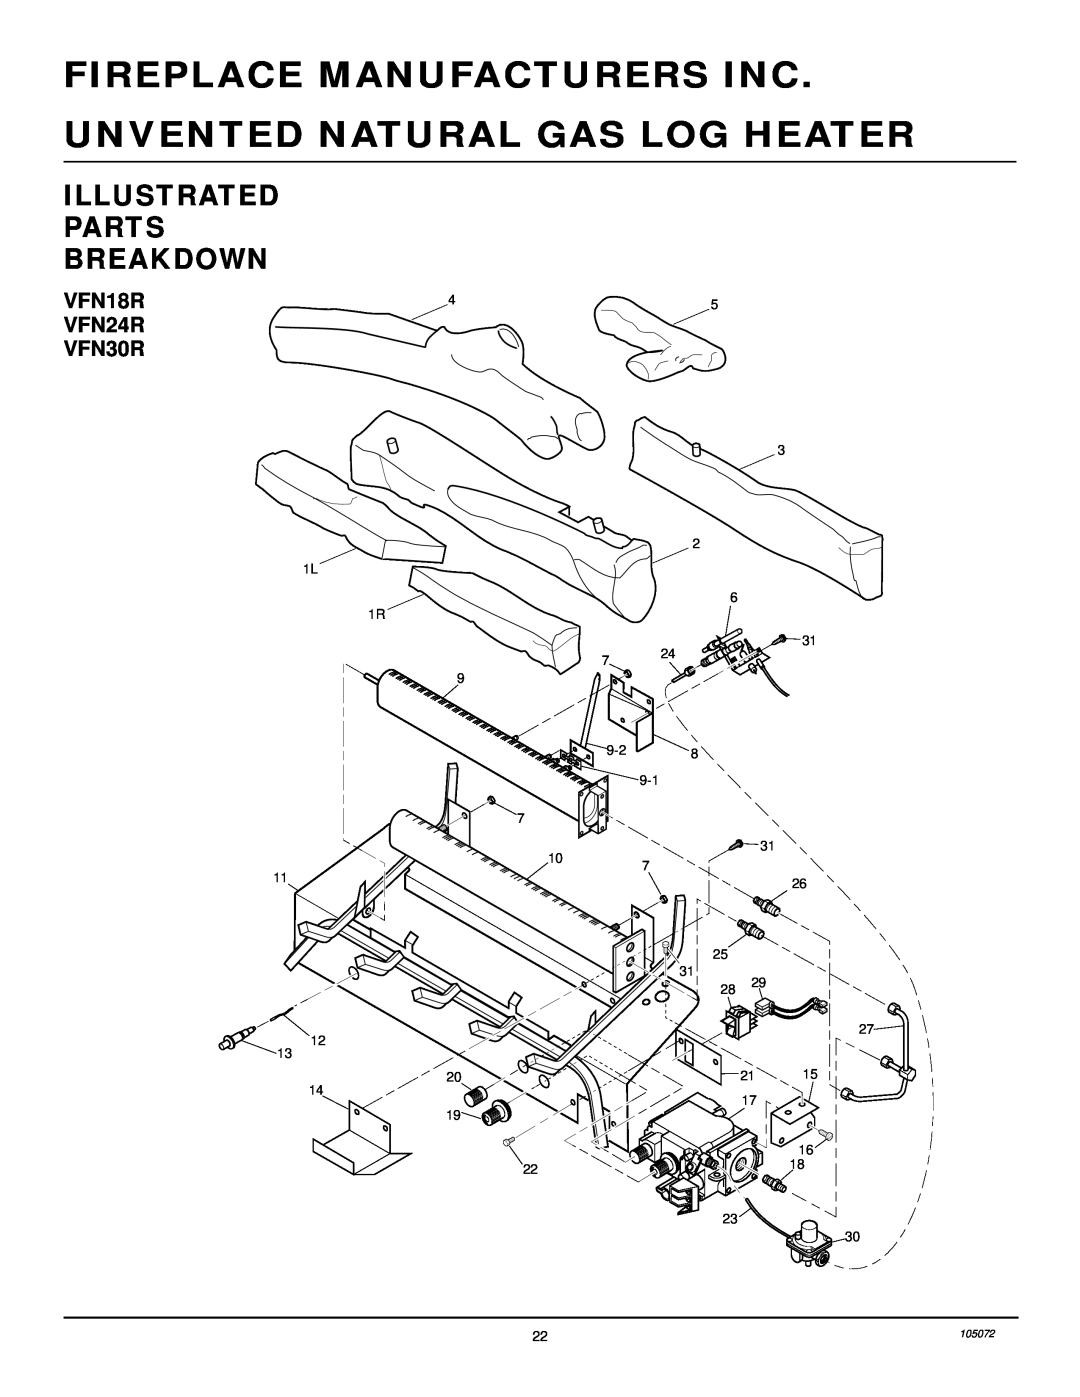 FMI Illustrated Parts Breakdown, Fireplace Manufacturers Inc, Unvented Natural Gas Log Heater, VFN18R VFN24R VFN30R 